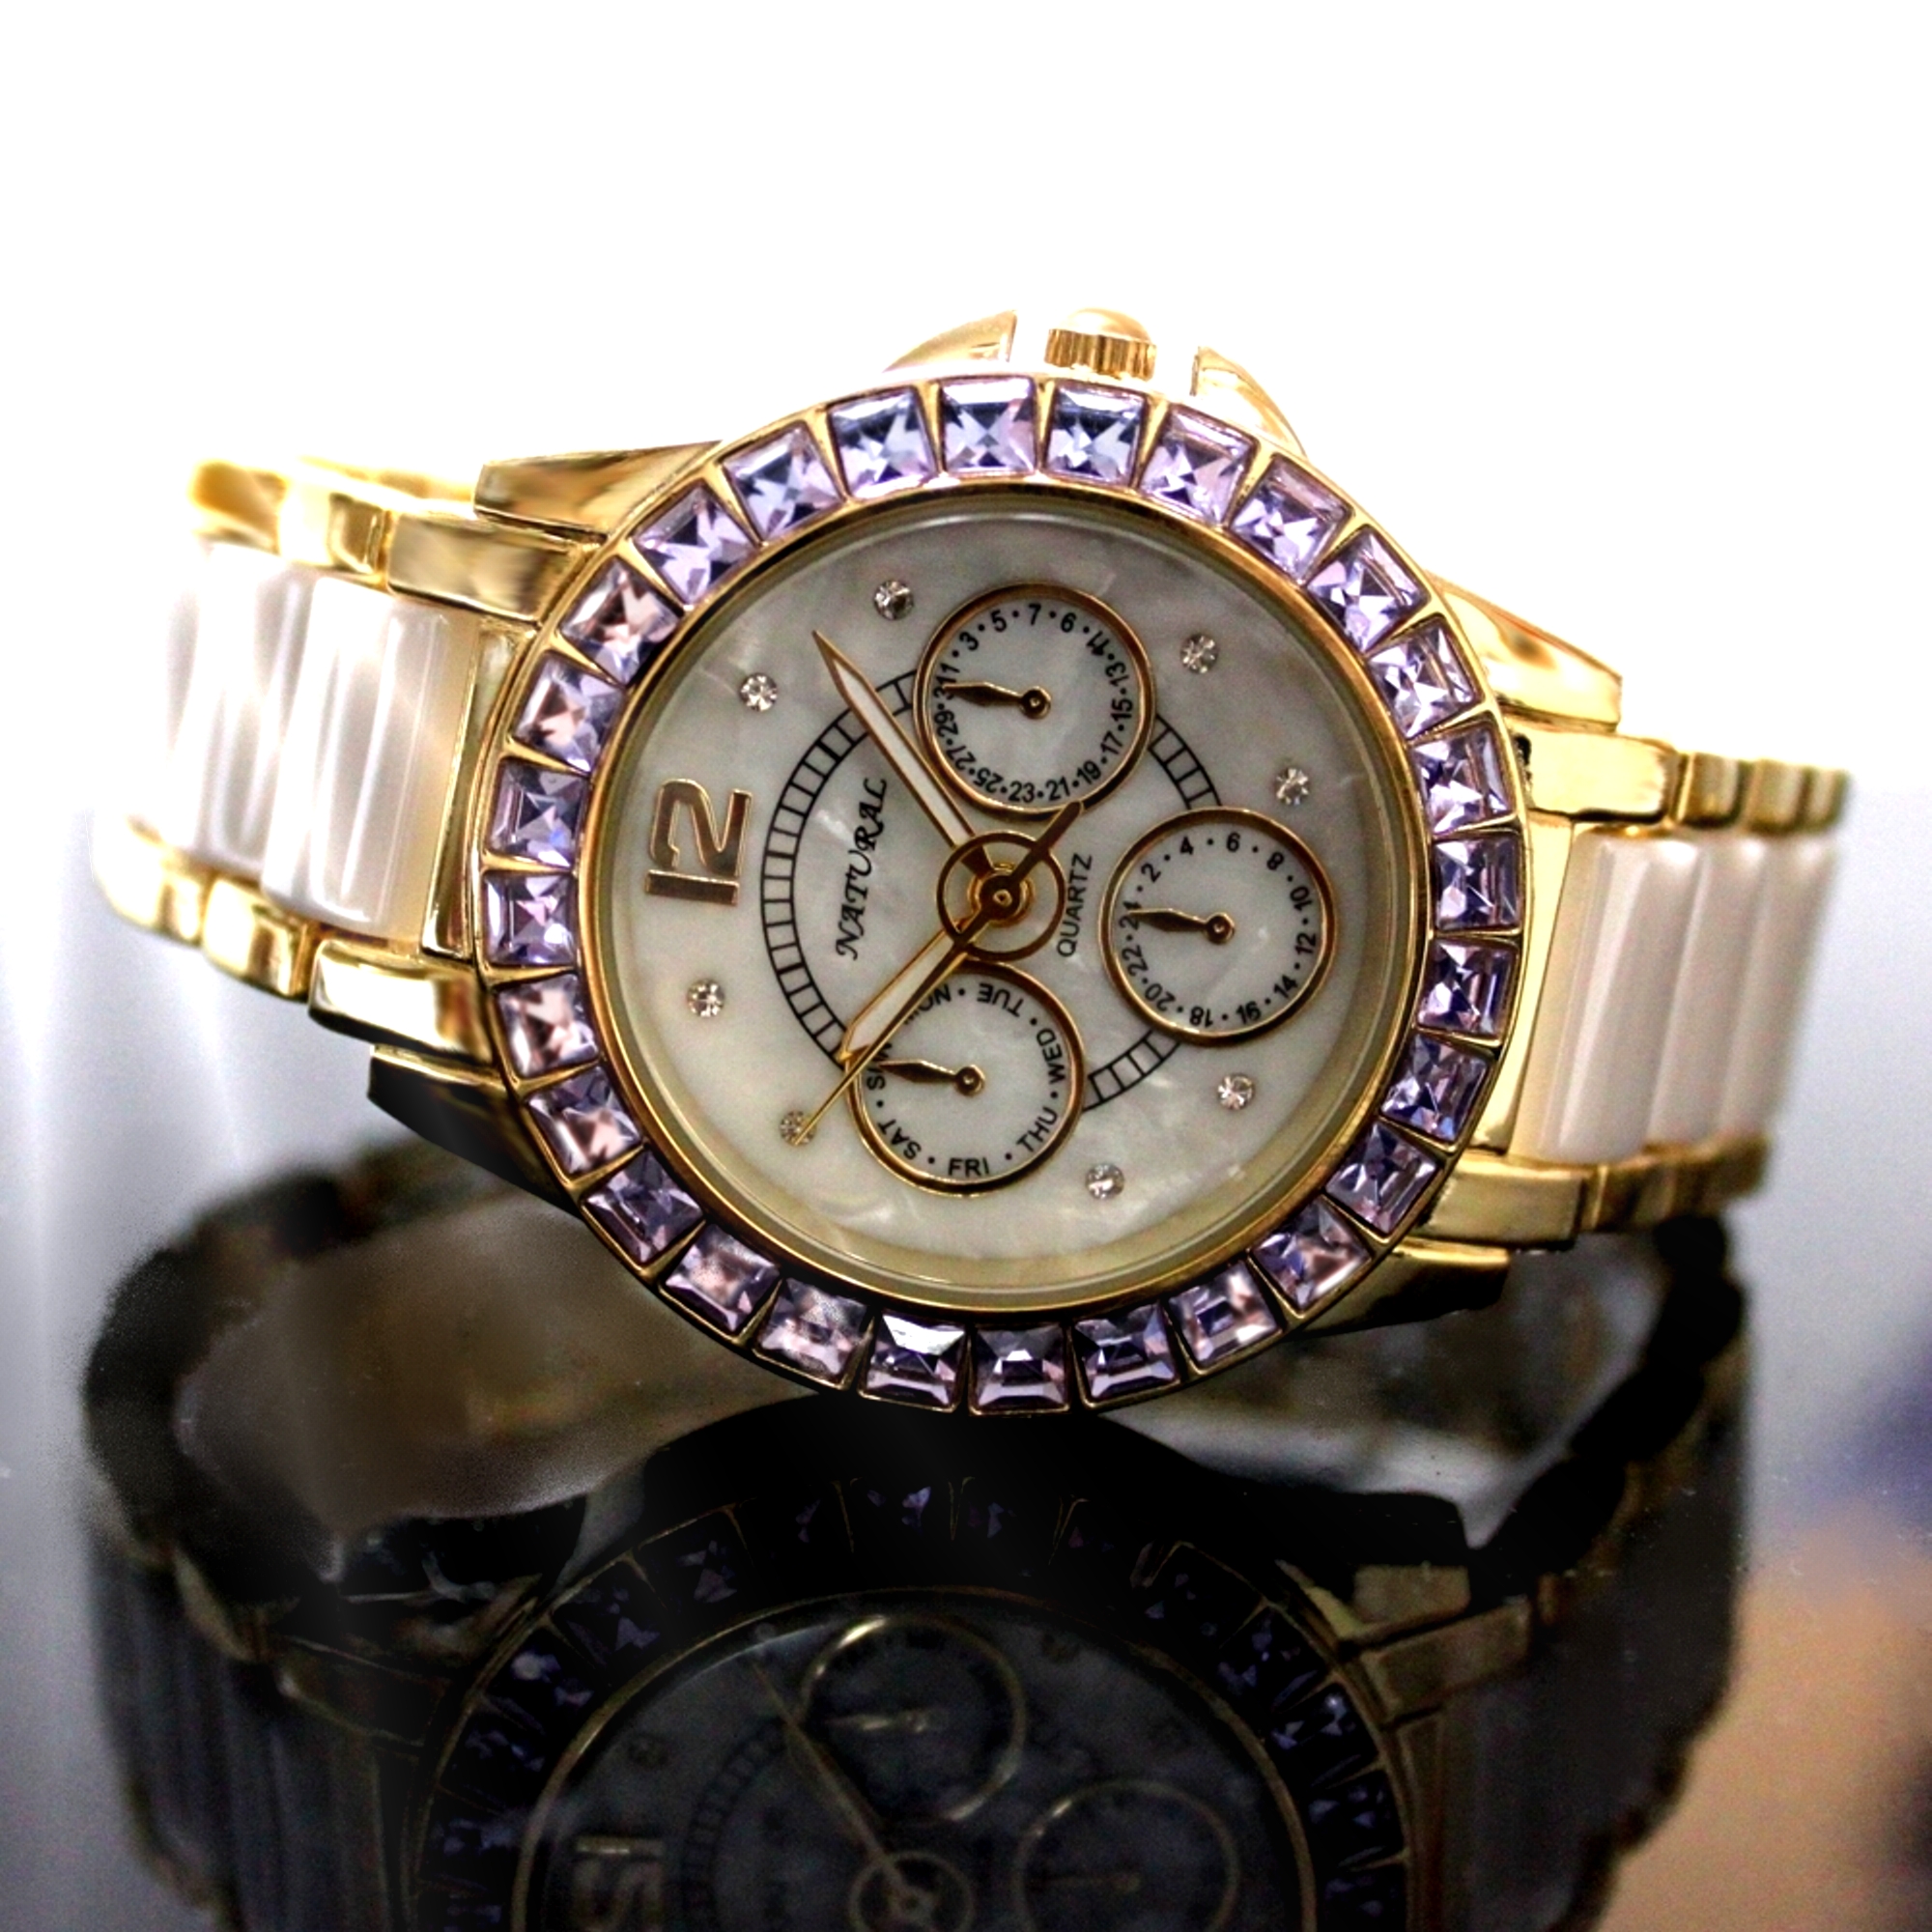 FW830W NATURAL White Dial Ceramic Water Resistant Violet Crystal Bracelet Watch